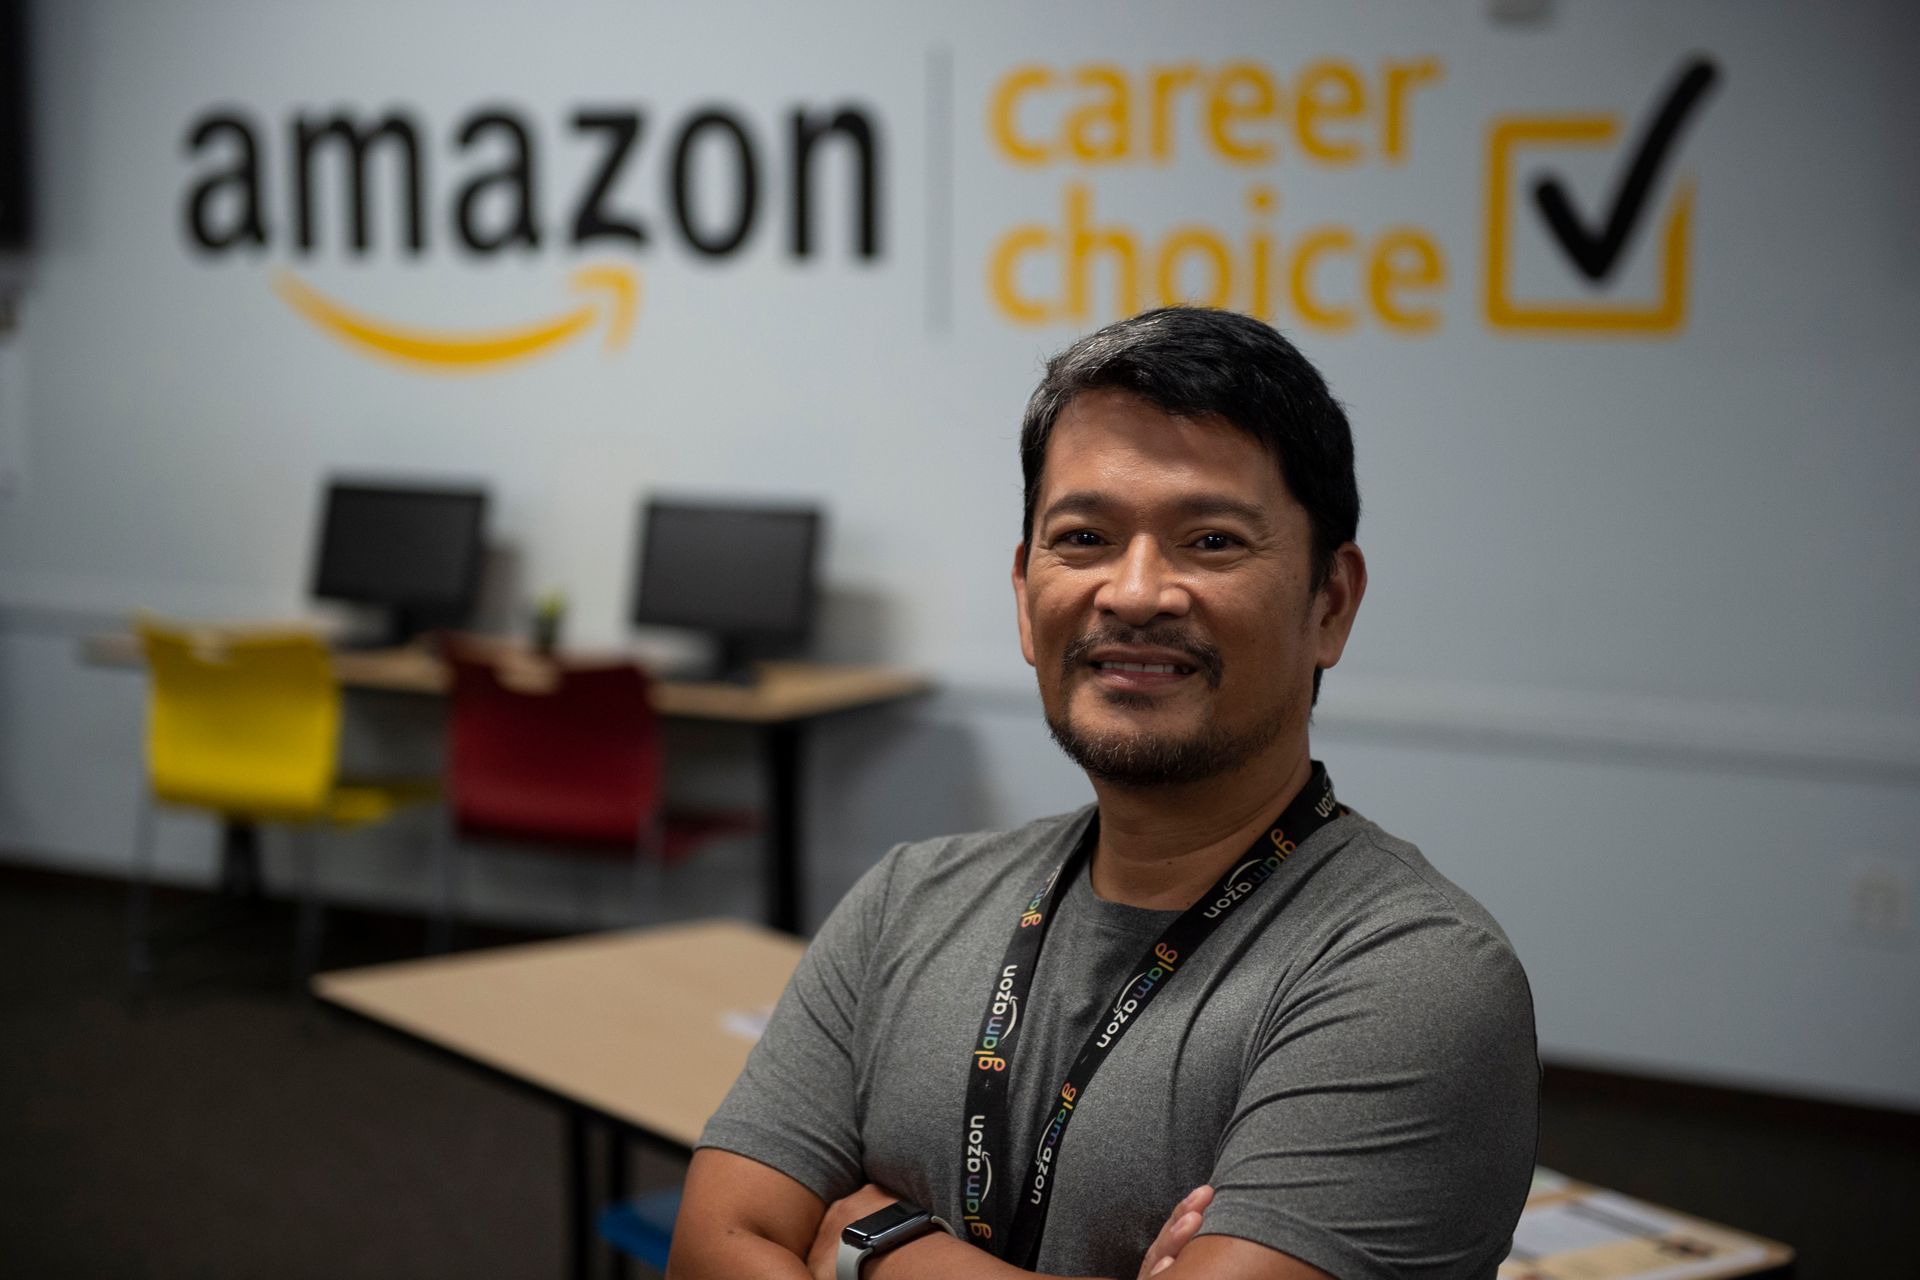 An Amazon employee in charge of training in the Seattle office